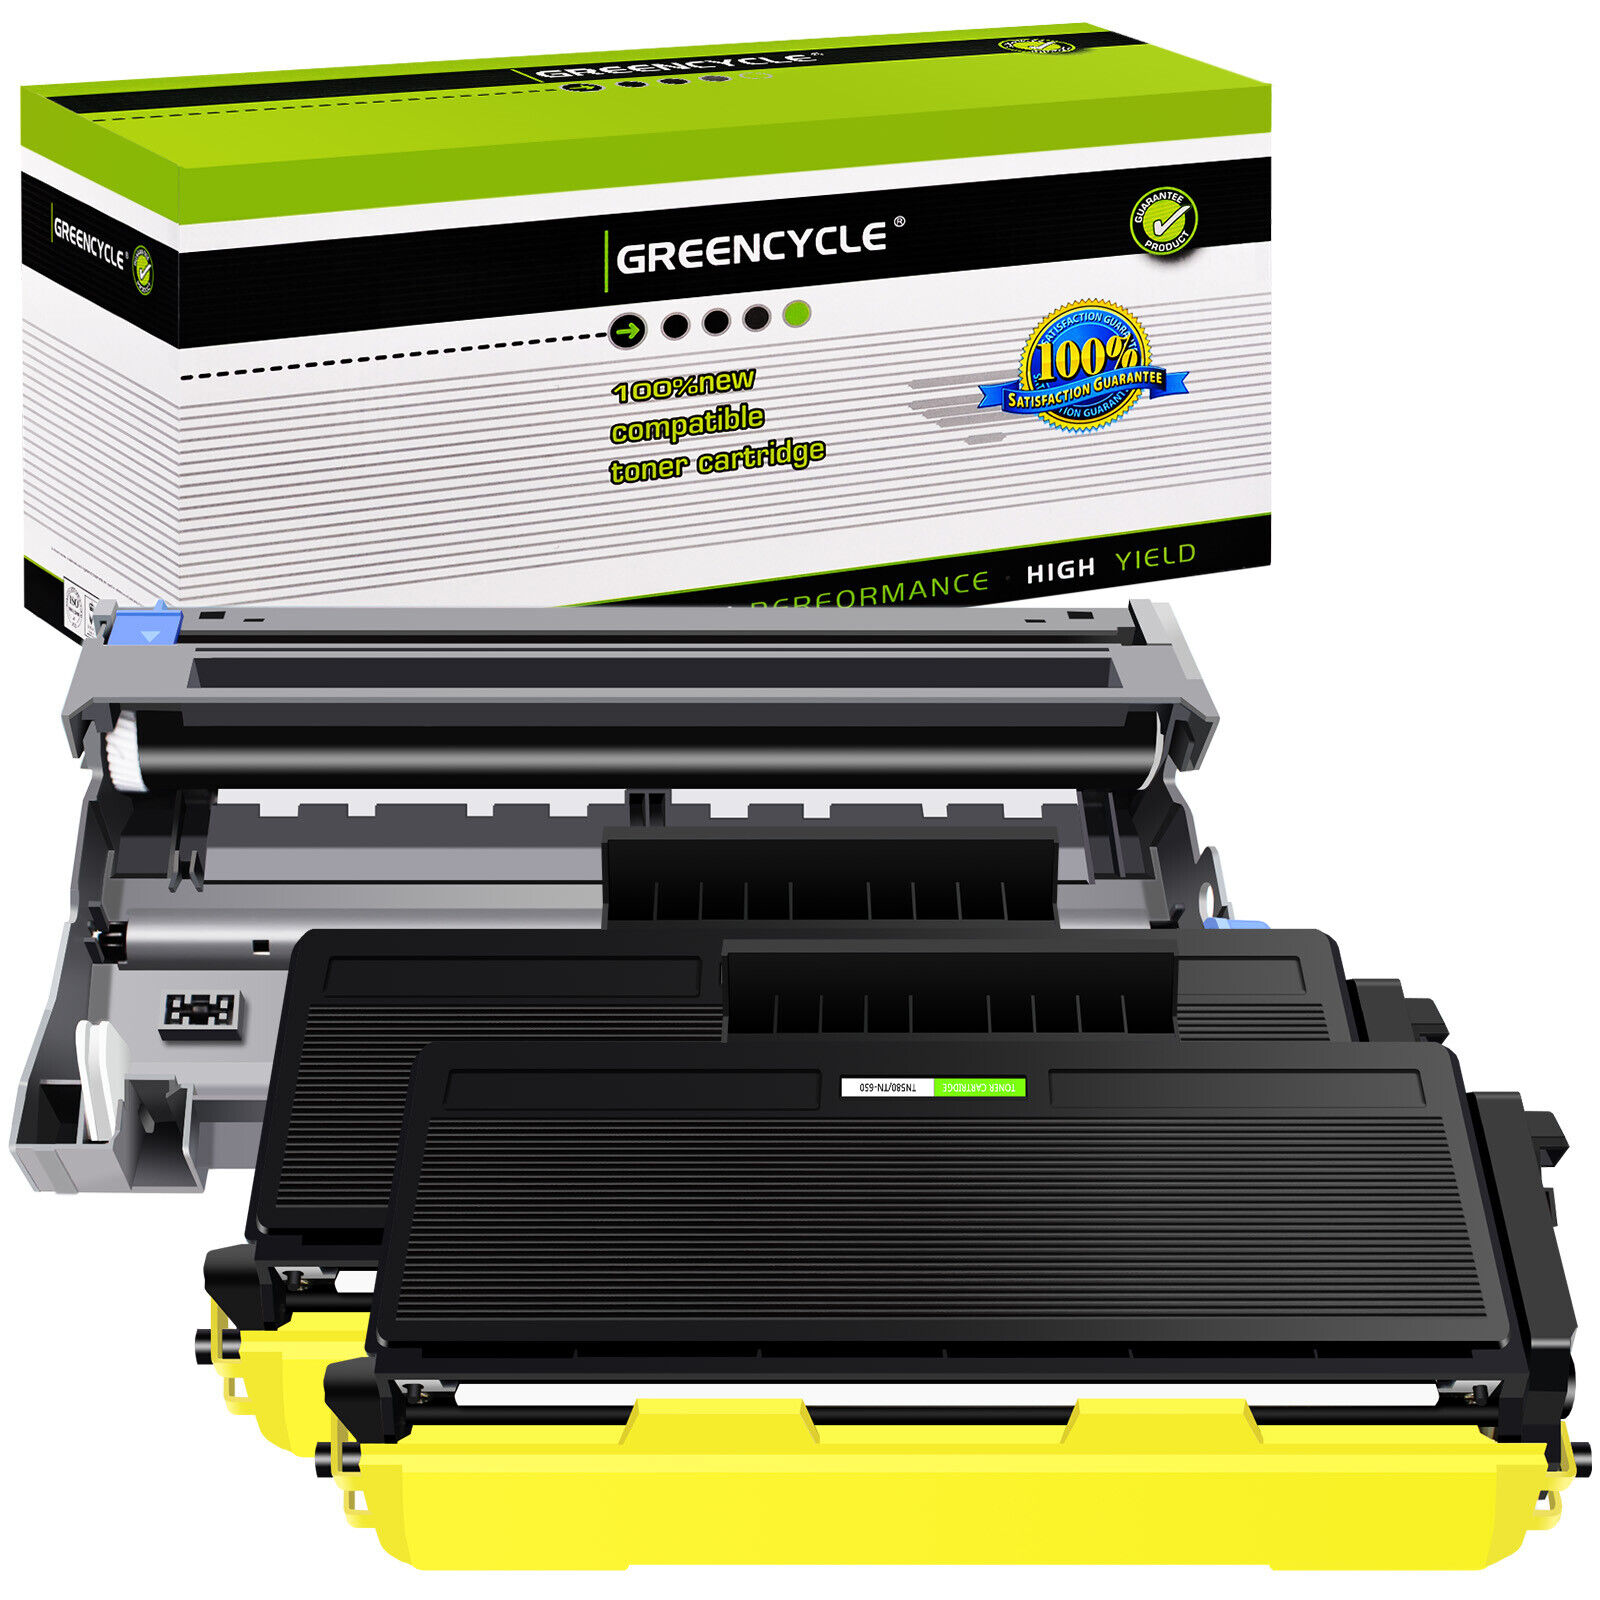 2x TN580 Toner +1x DR520 Drum For Brother MFC-8460N 8660DN 8670DN HL-5240 5250DN